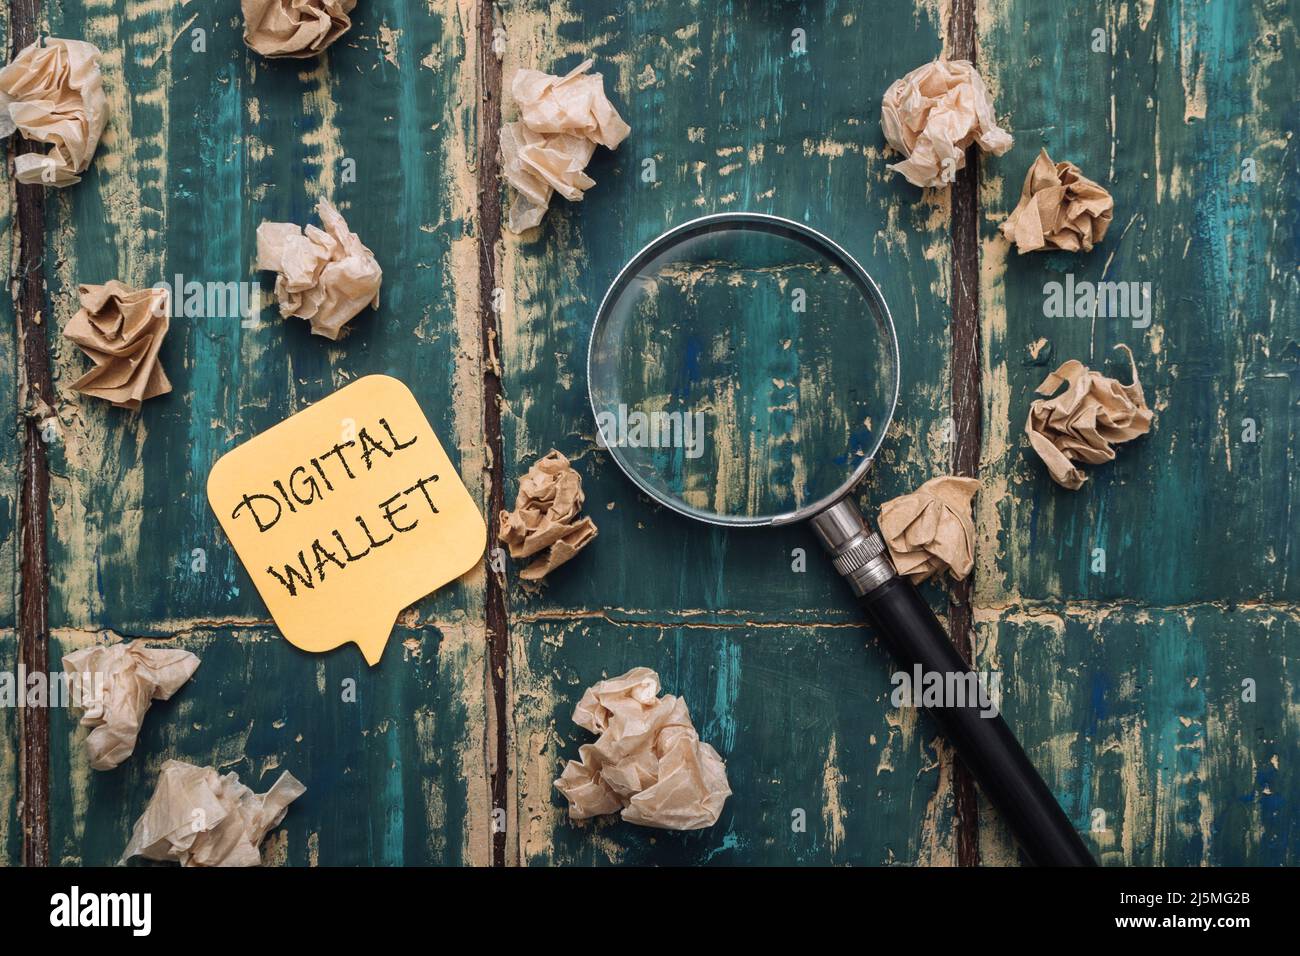 DIGITAL WALLET text on a sticky note on a green wooden background, crumpled notes and a magnifying glass lie nearby Stock Photo